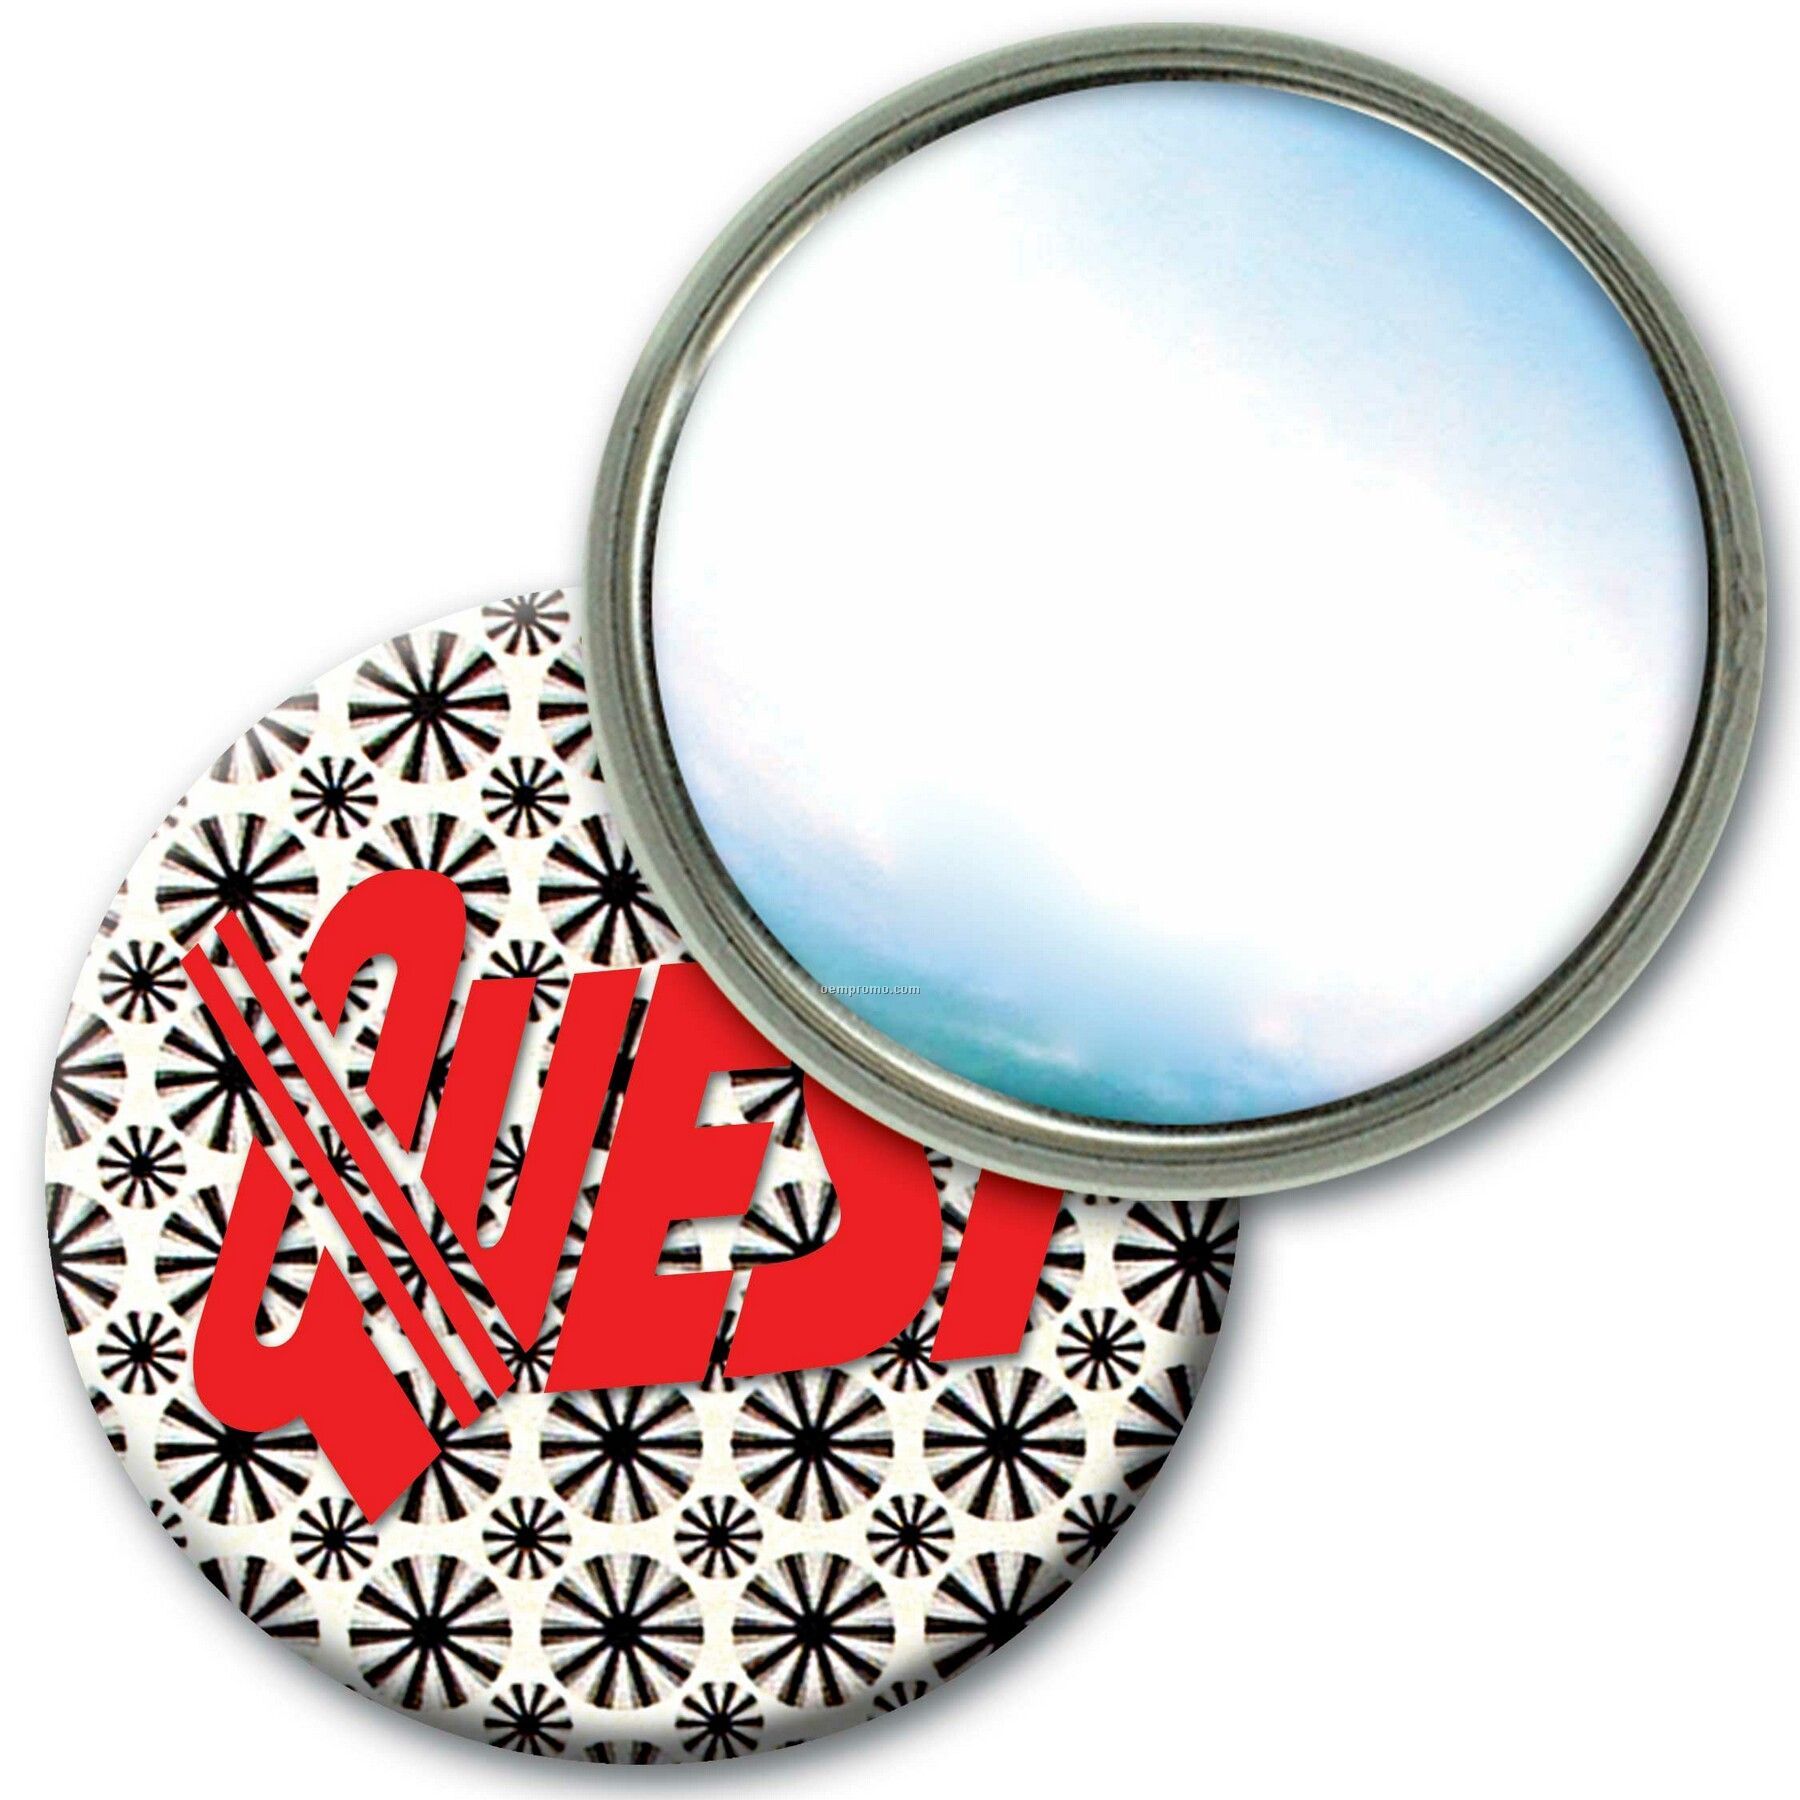 Compact Mirror Lenticular Animated Wheels Effect (Imprinted)